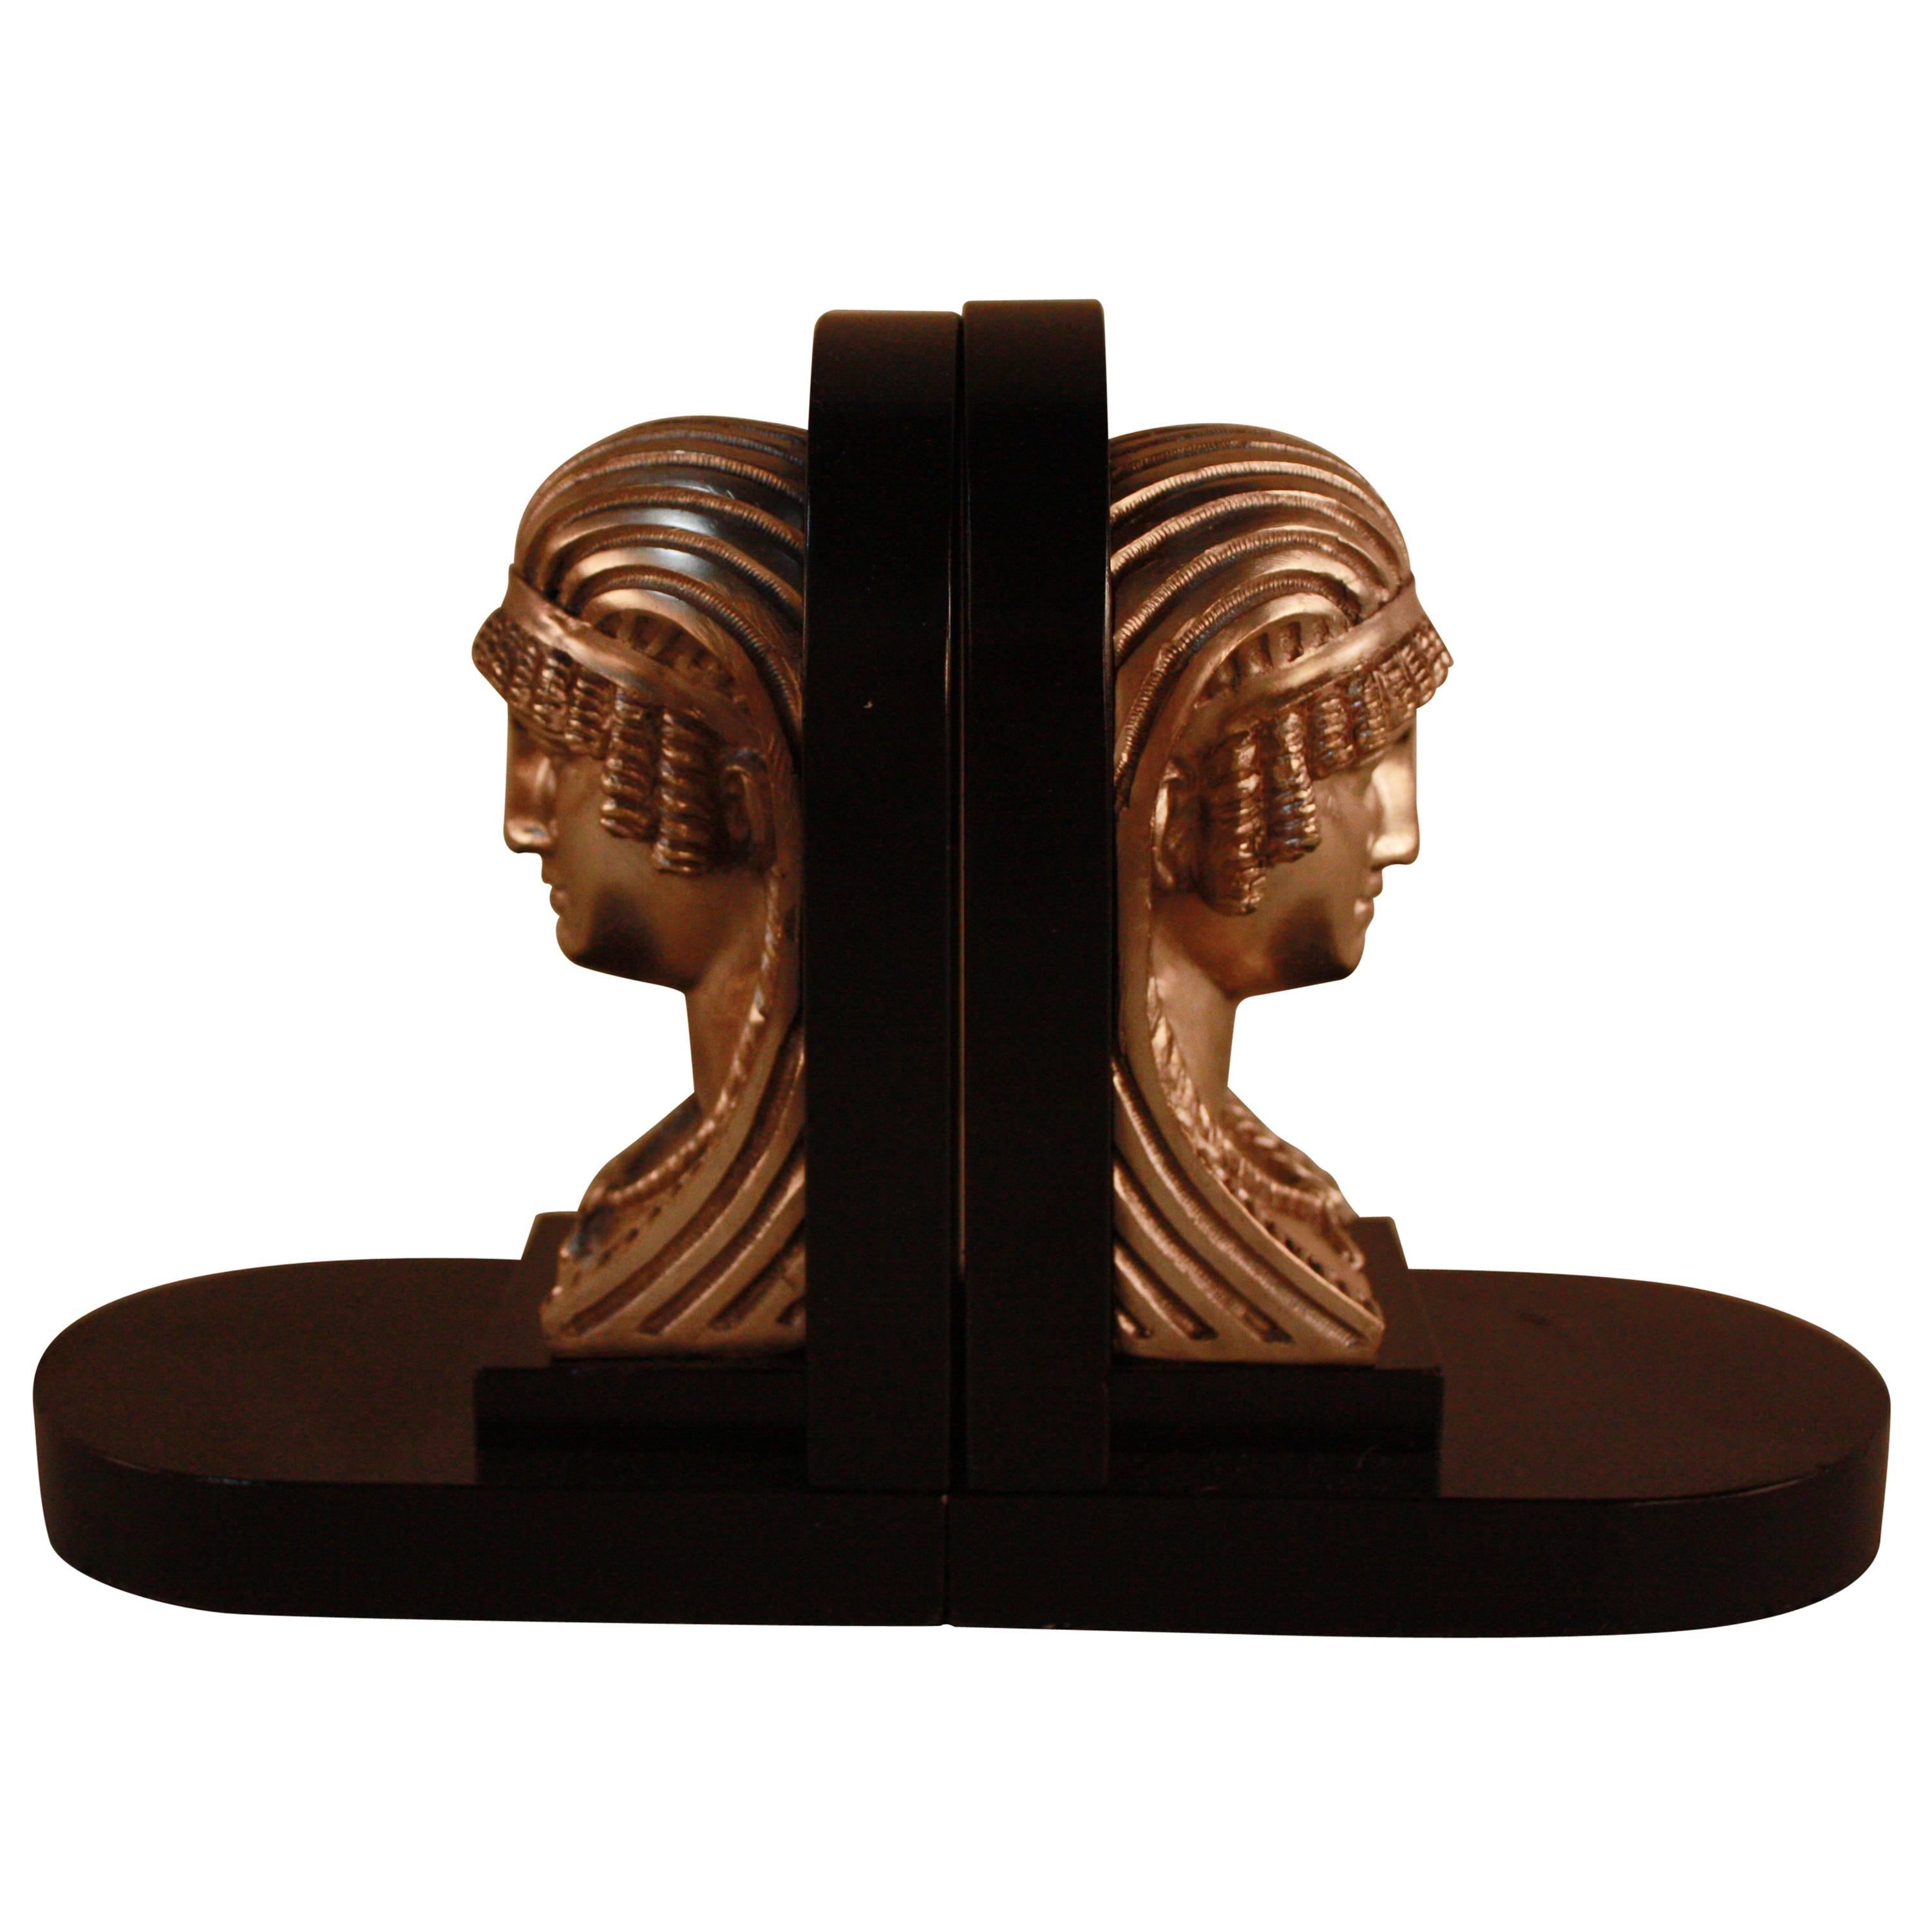 Egyptian Revival Art Deco Bookends